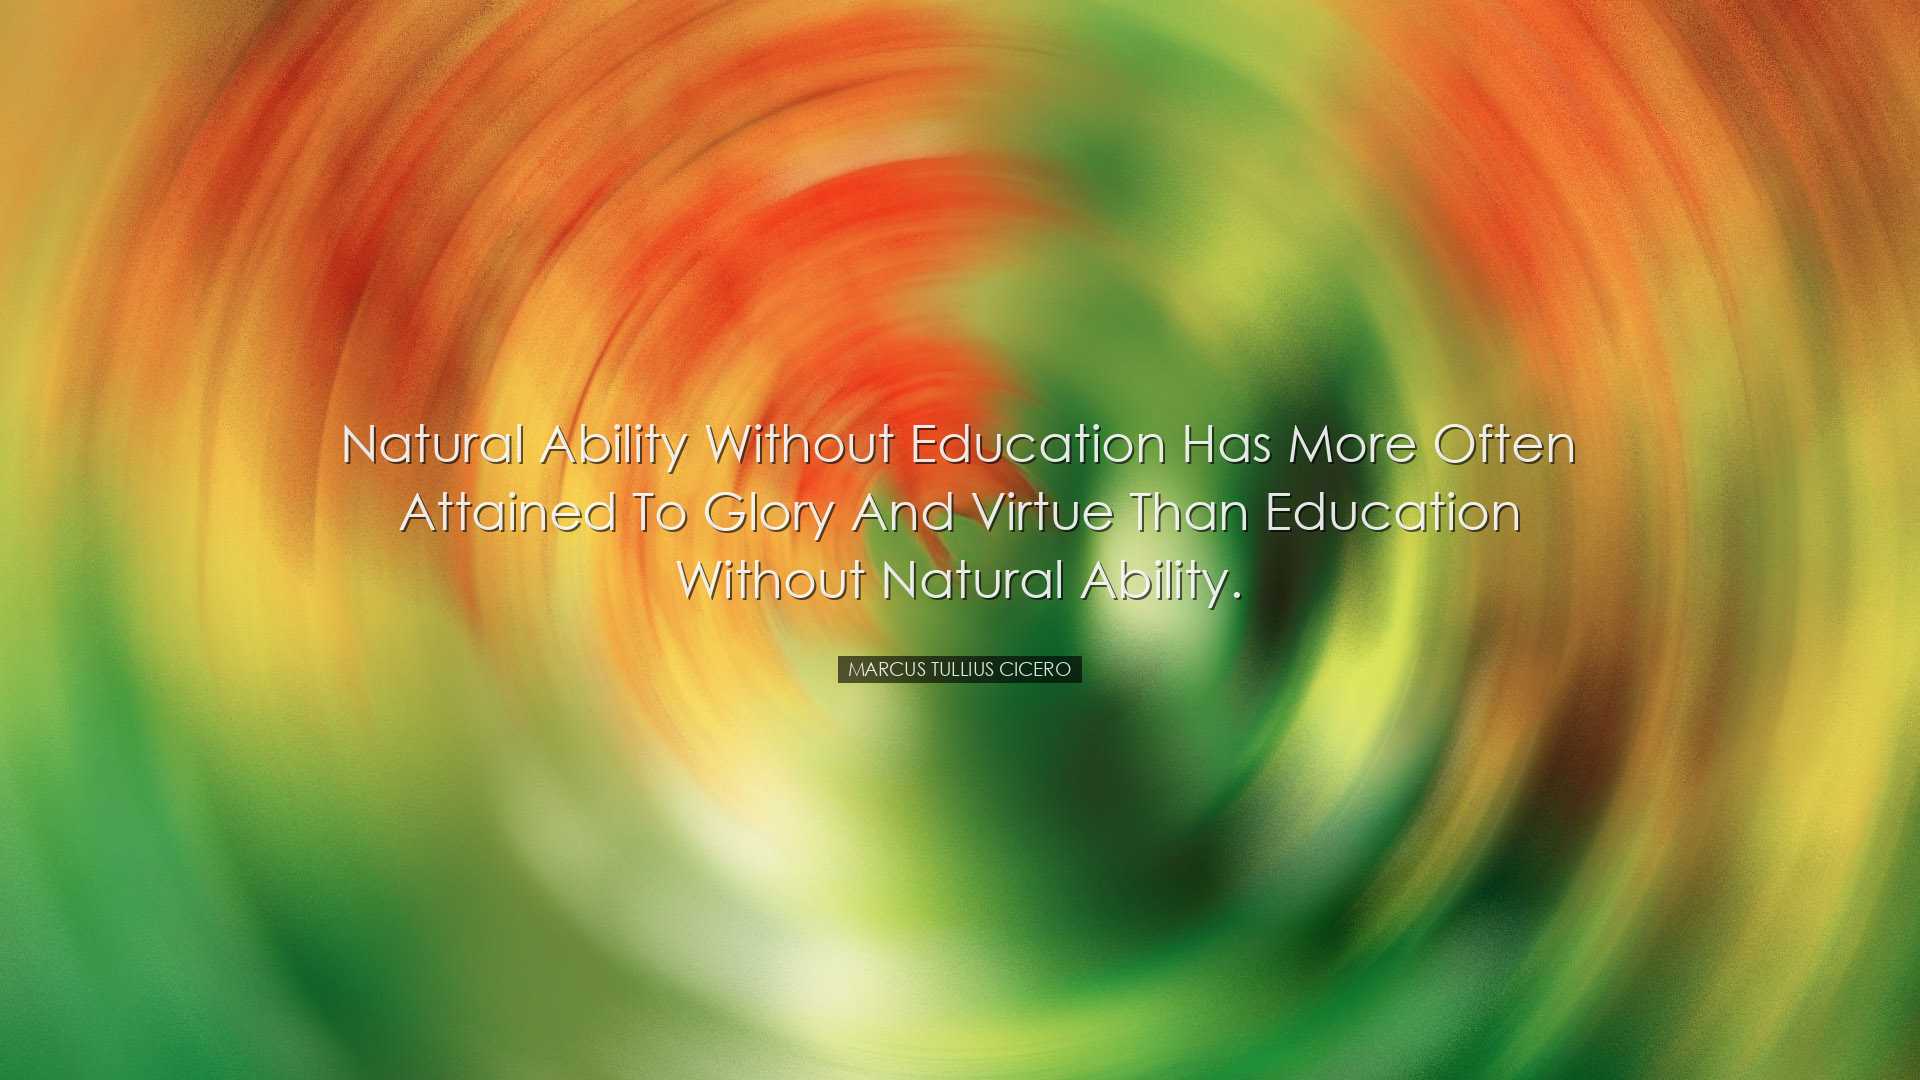 Natural ability without education has more often attained to glory